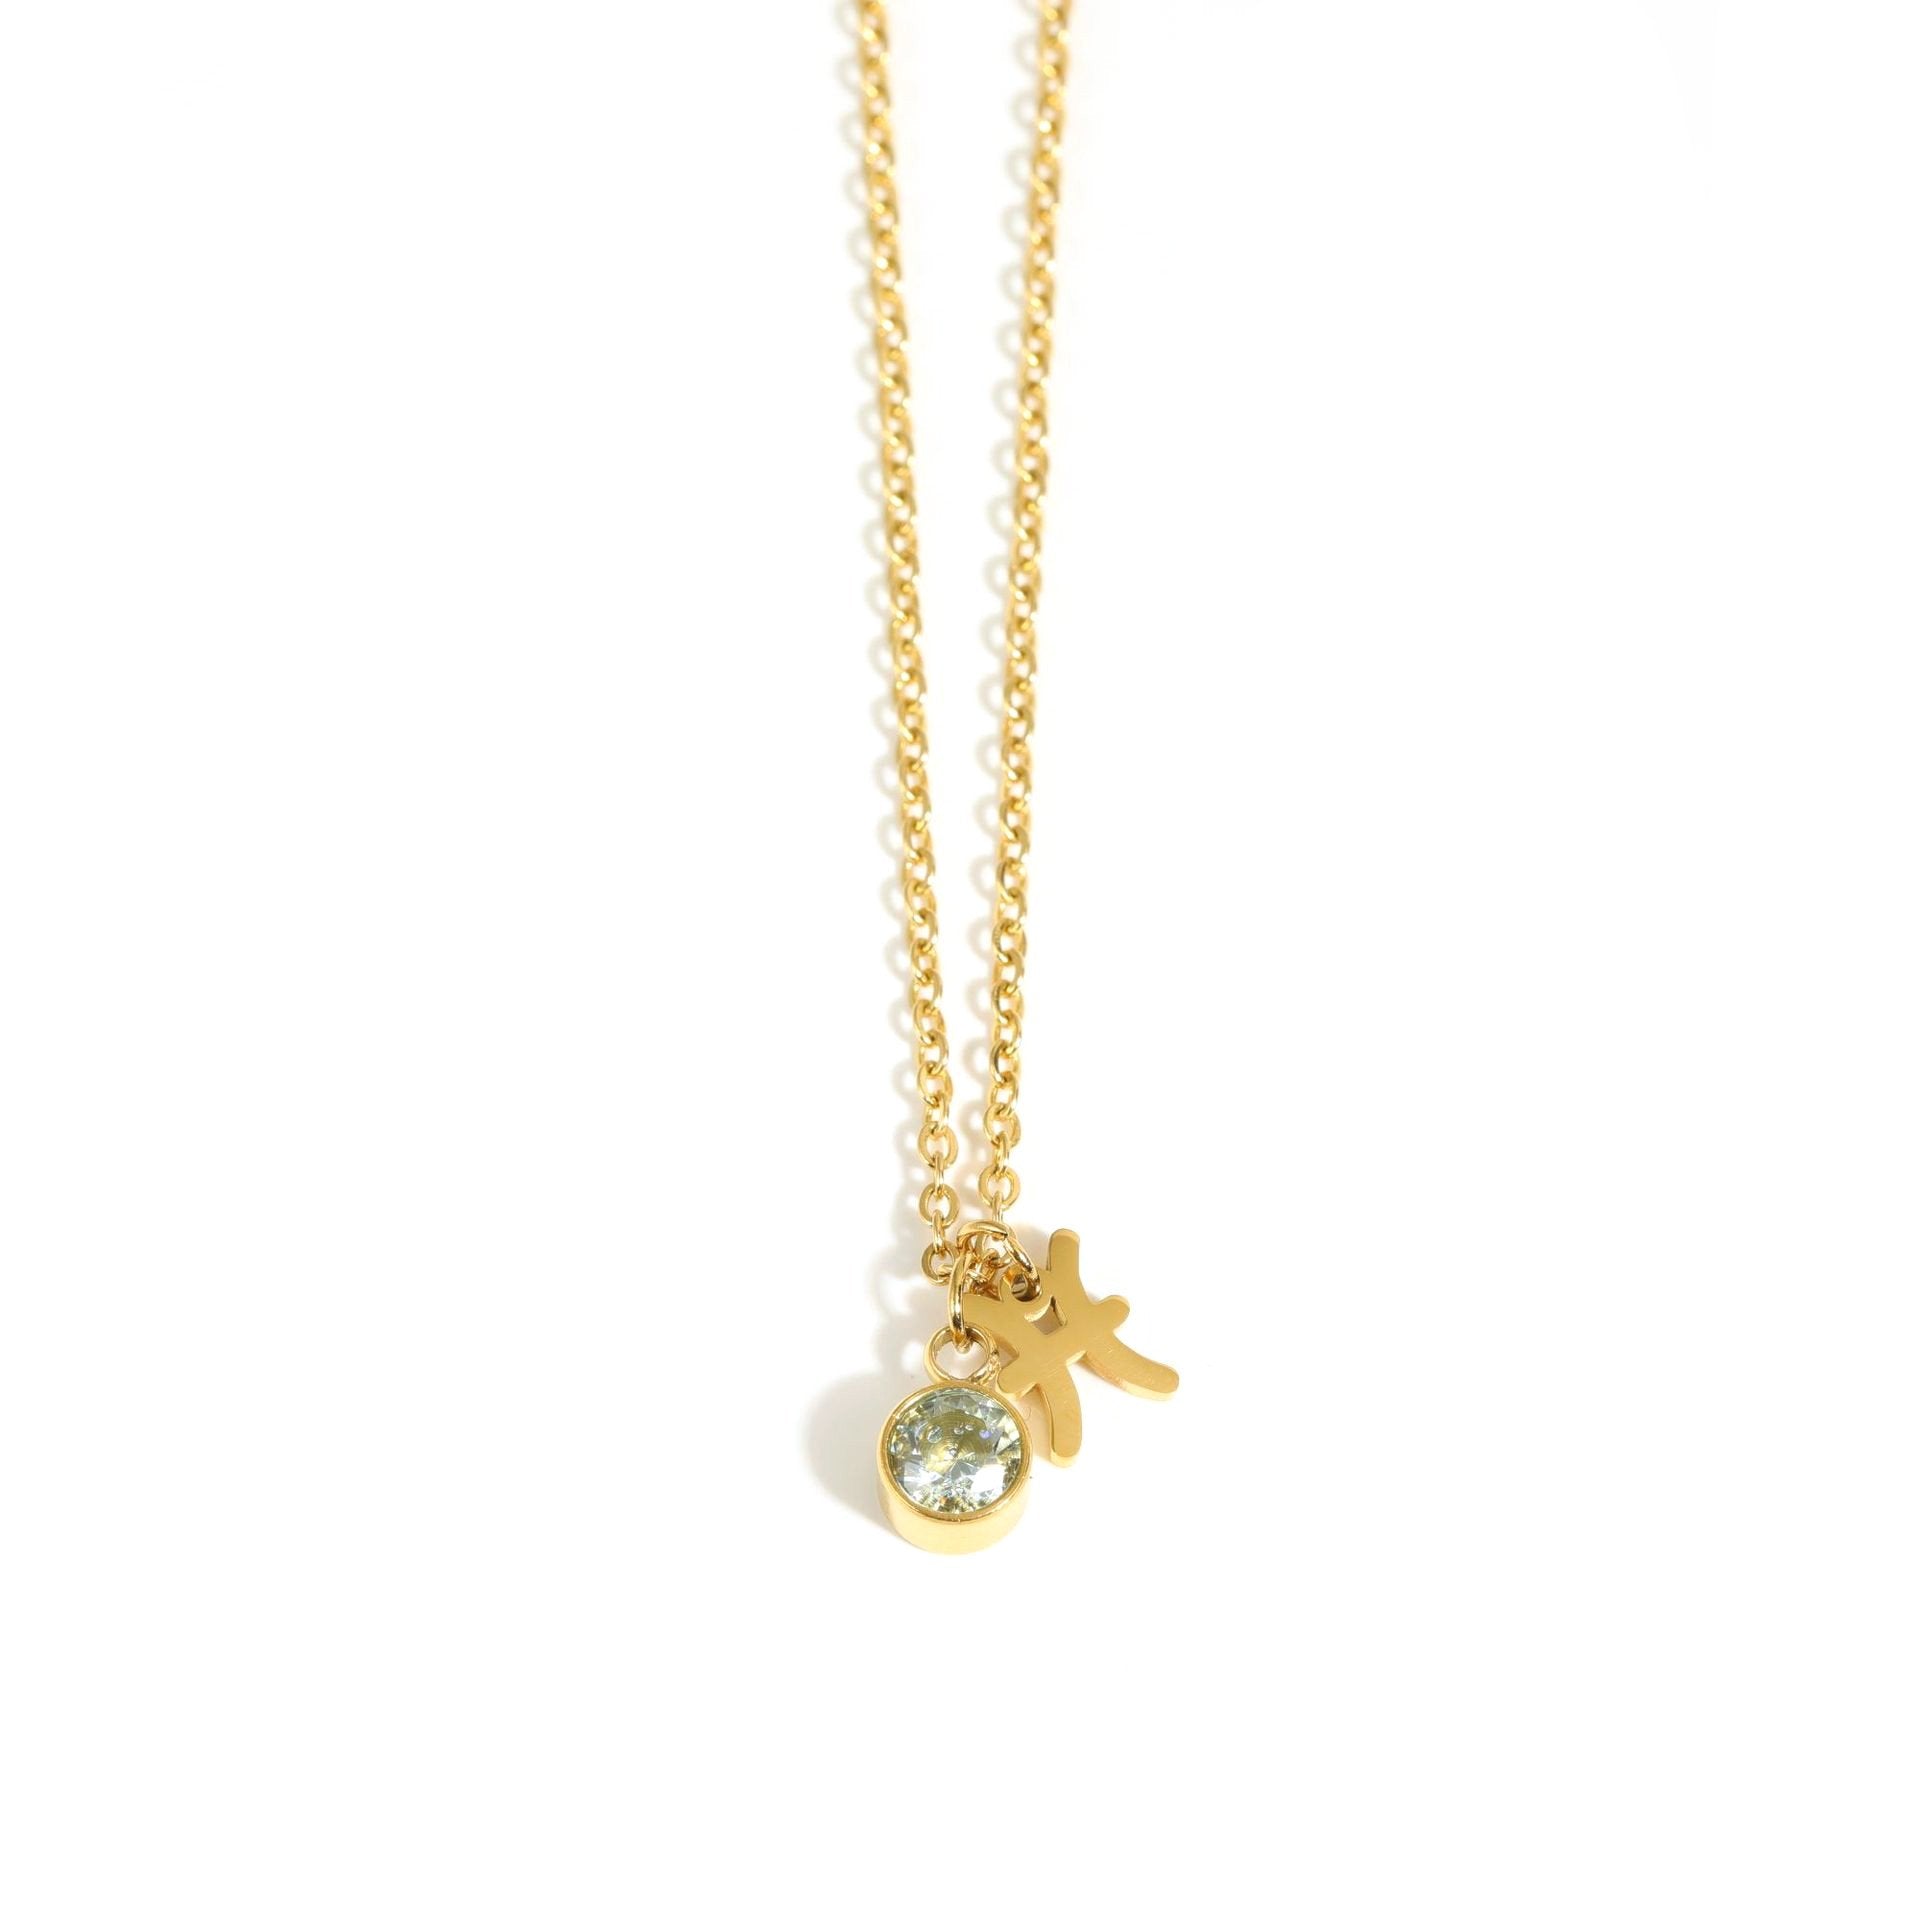 Pisces Zodiac Sign Birthstone Gold Necklace.